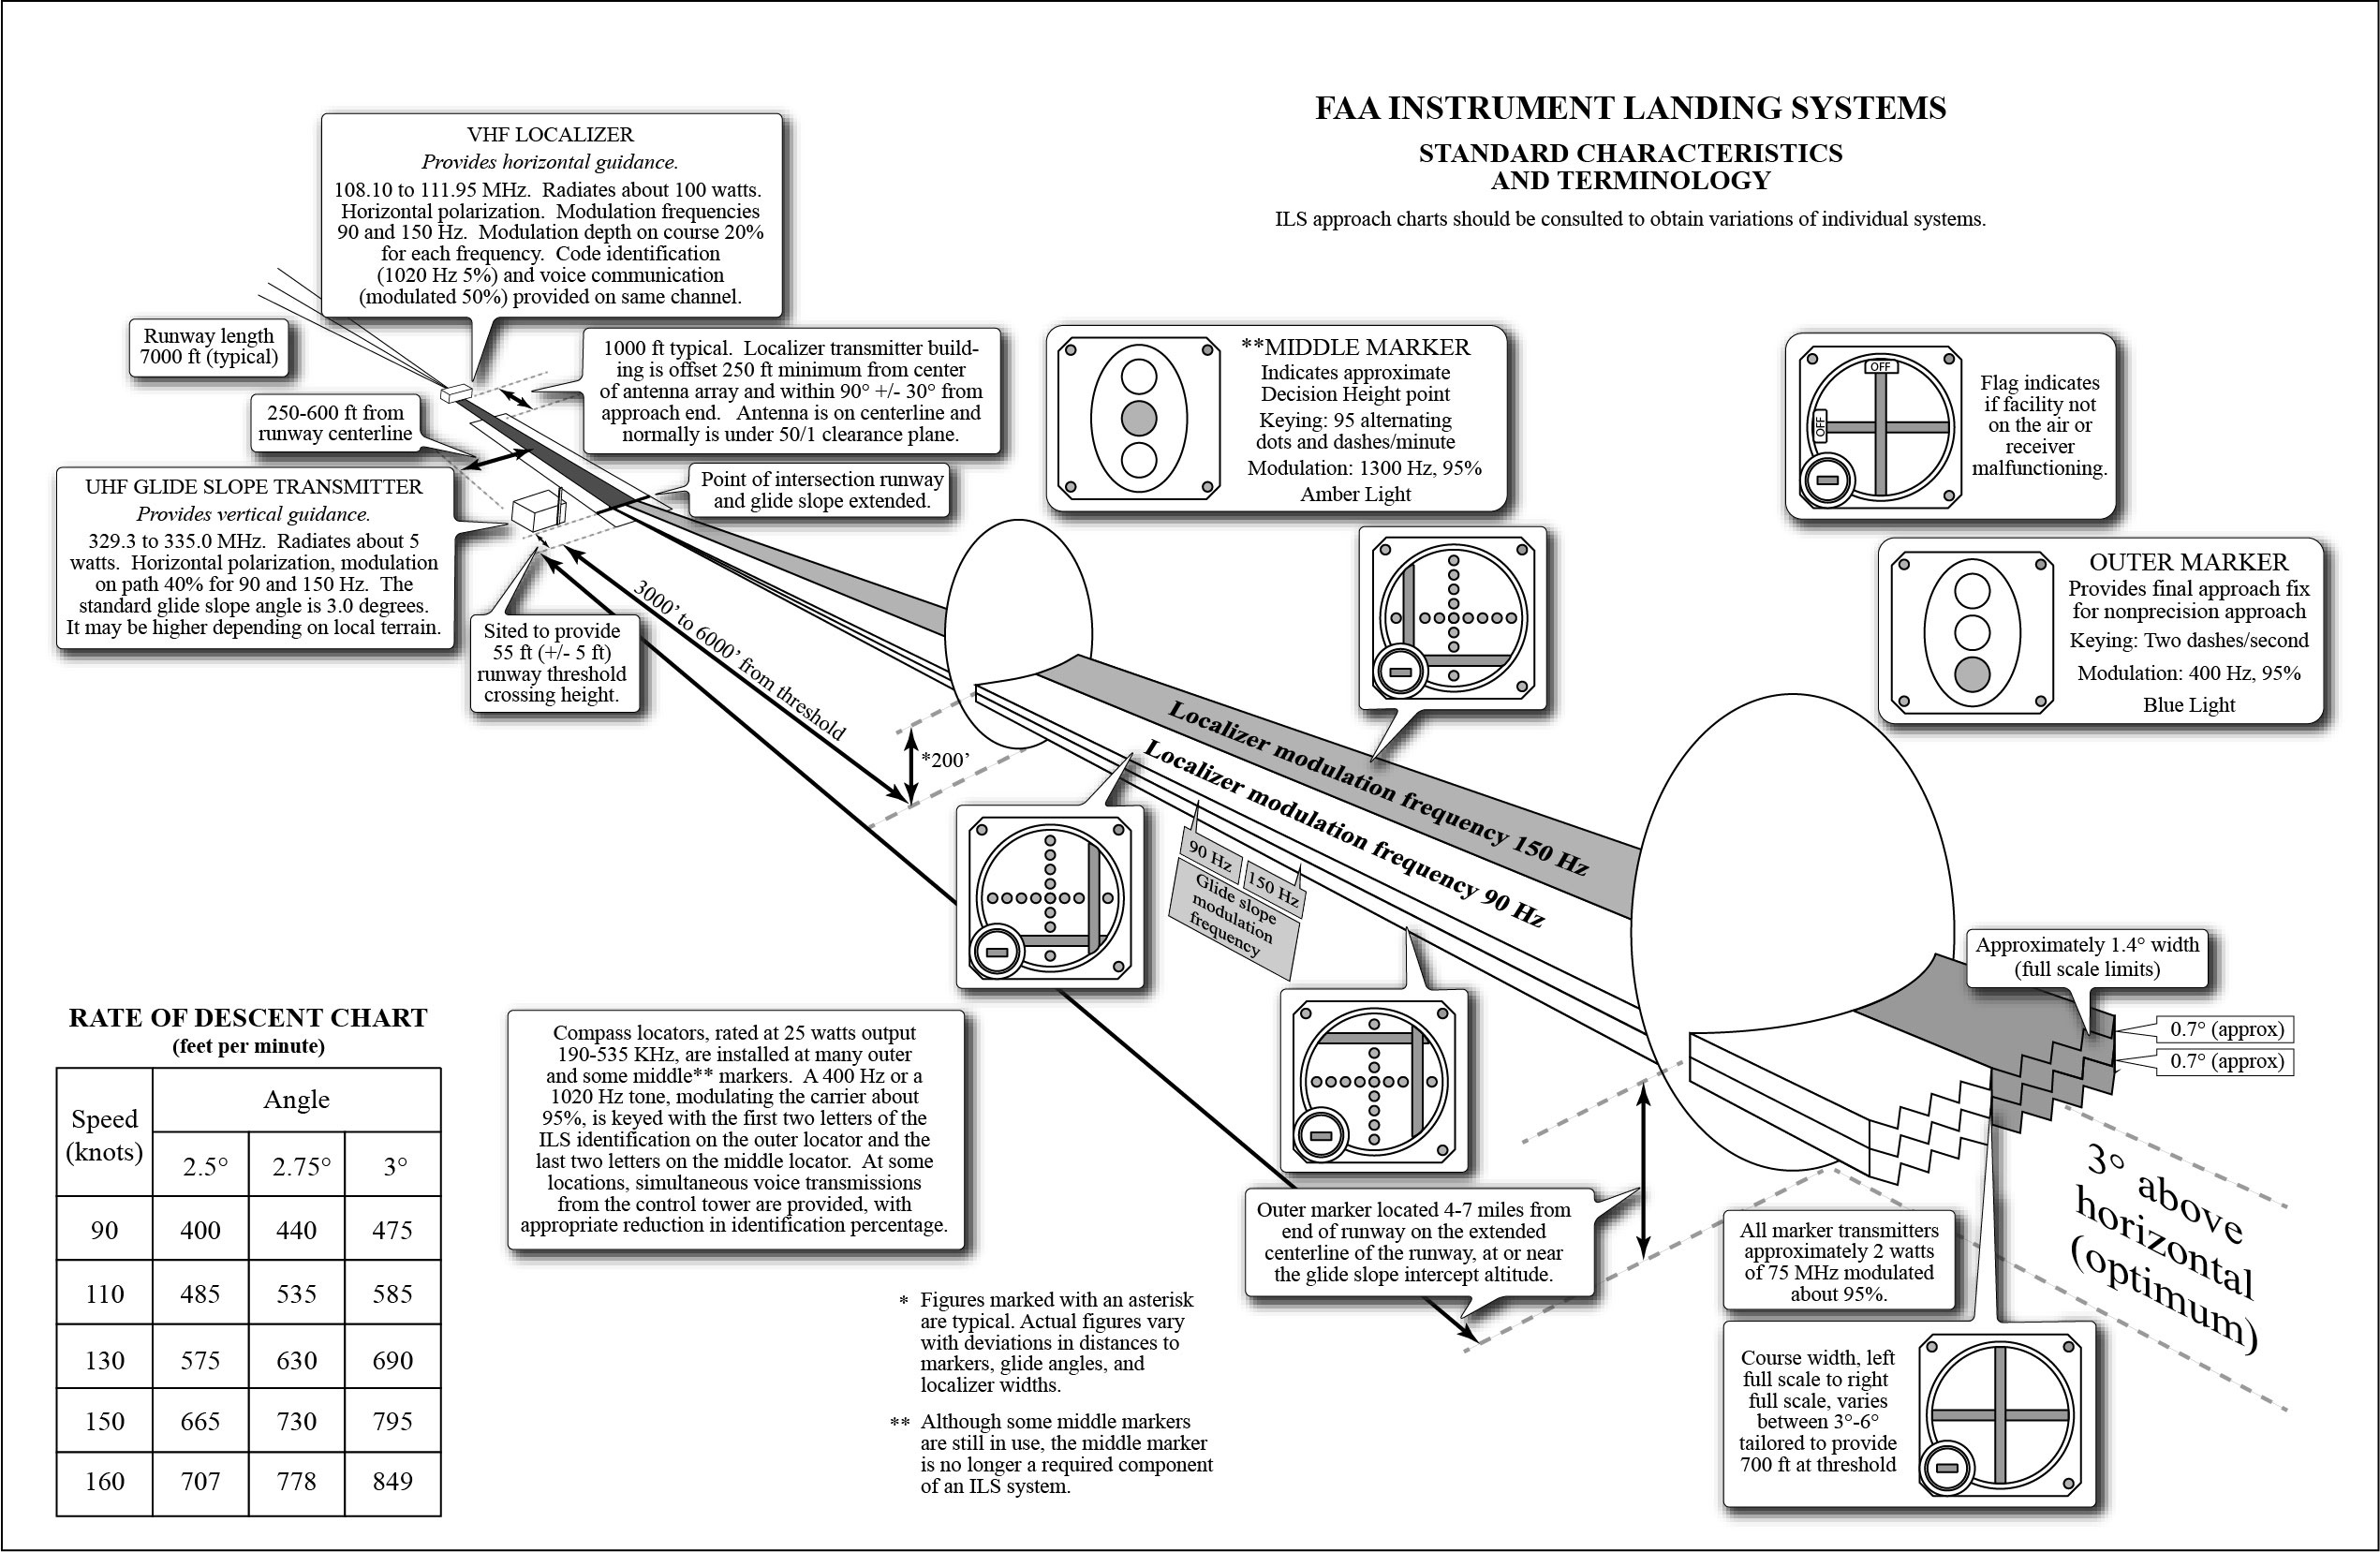 A graphic depicting FAA Instrument Landing Systems.